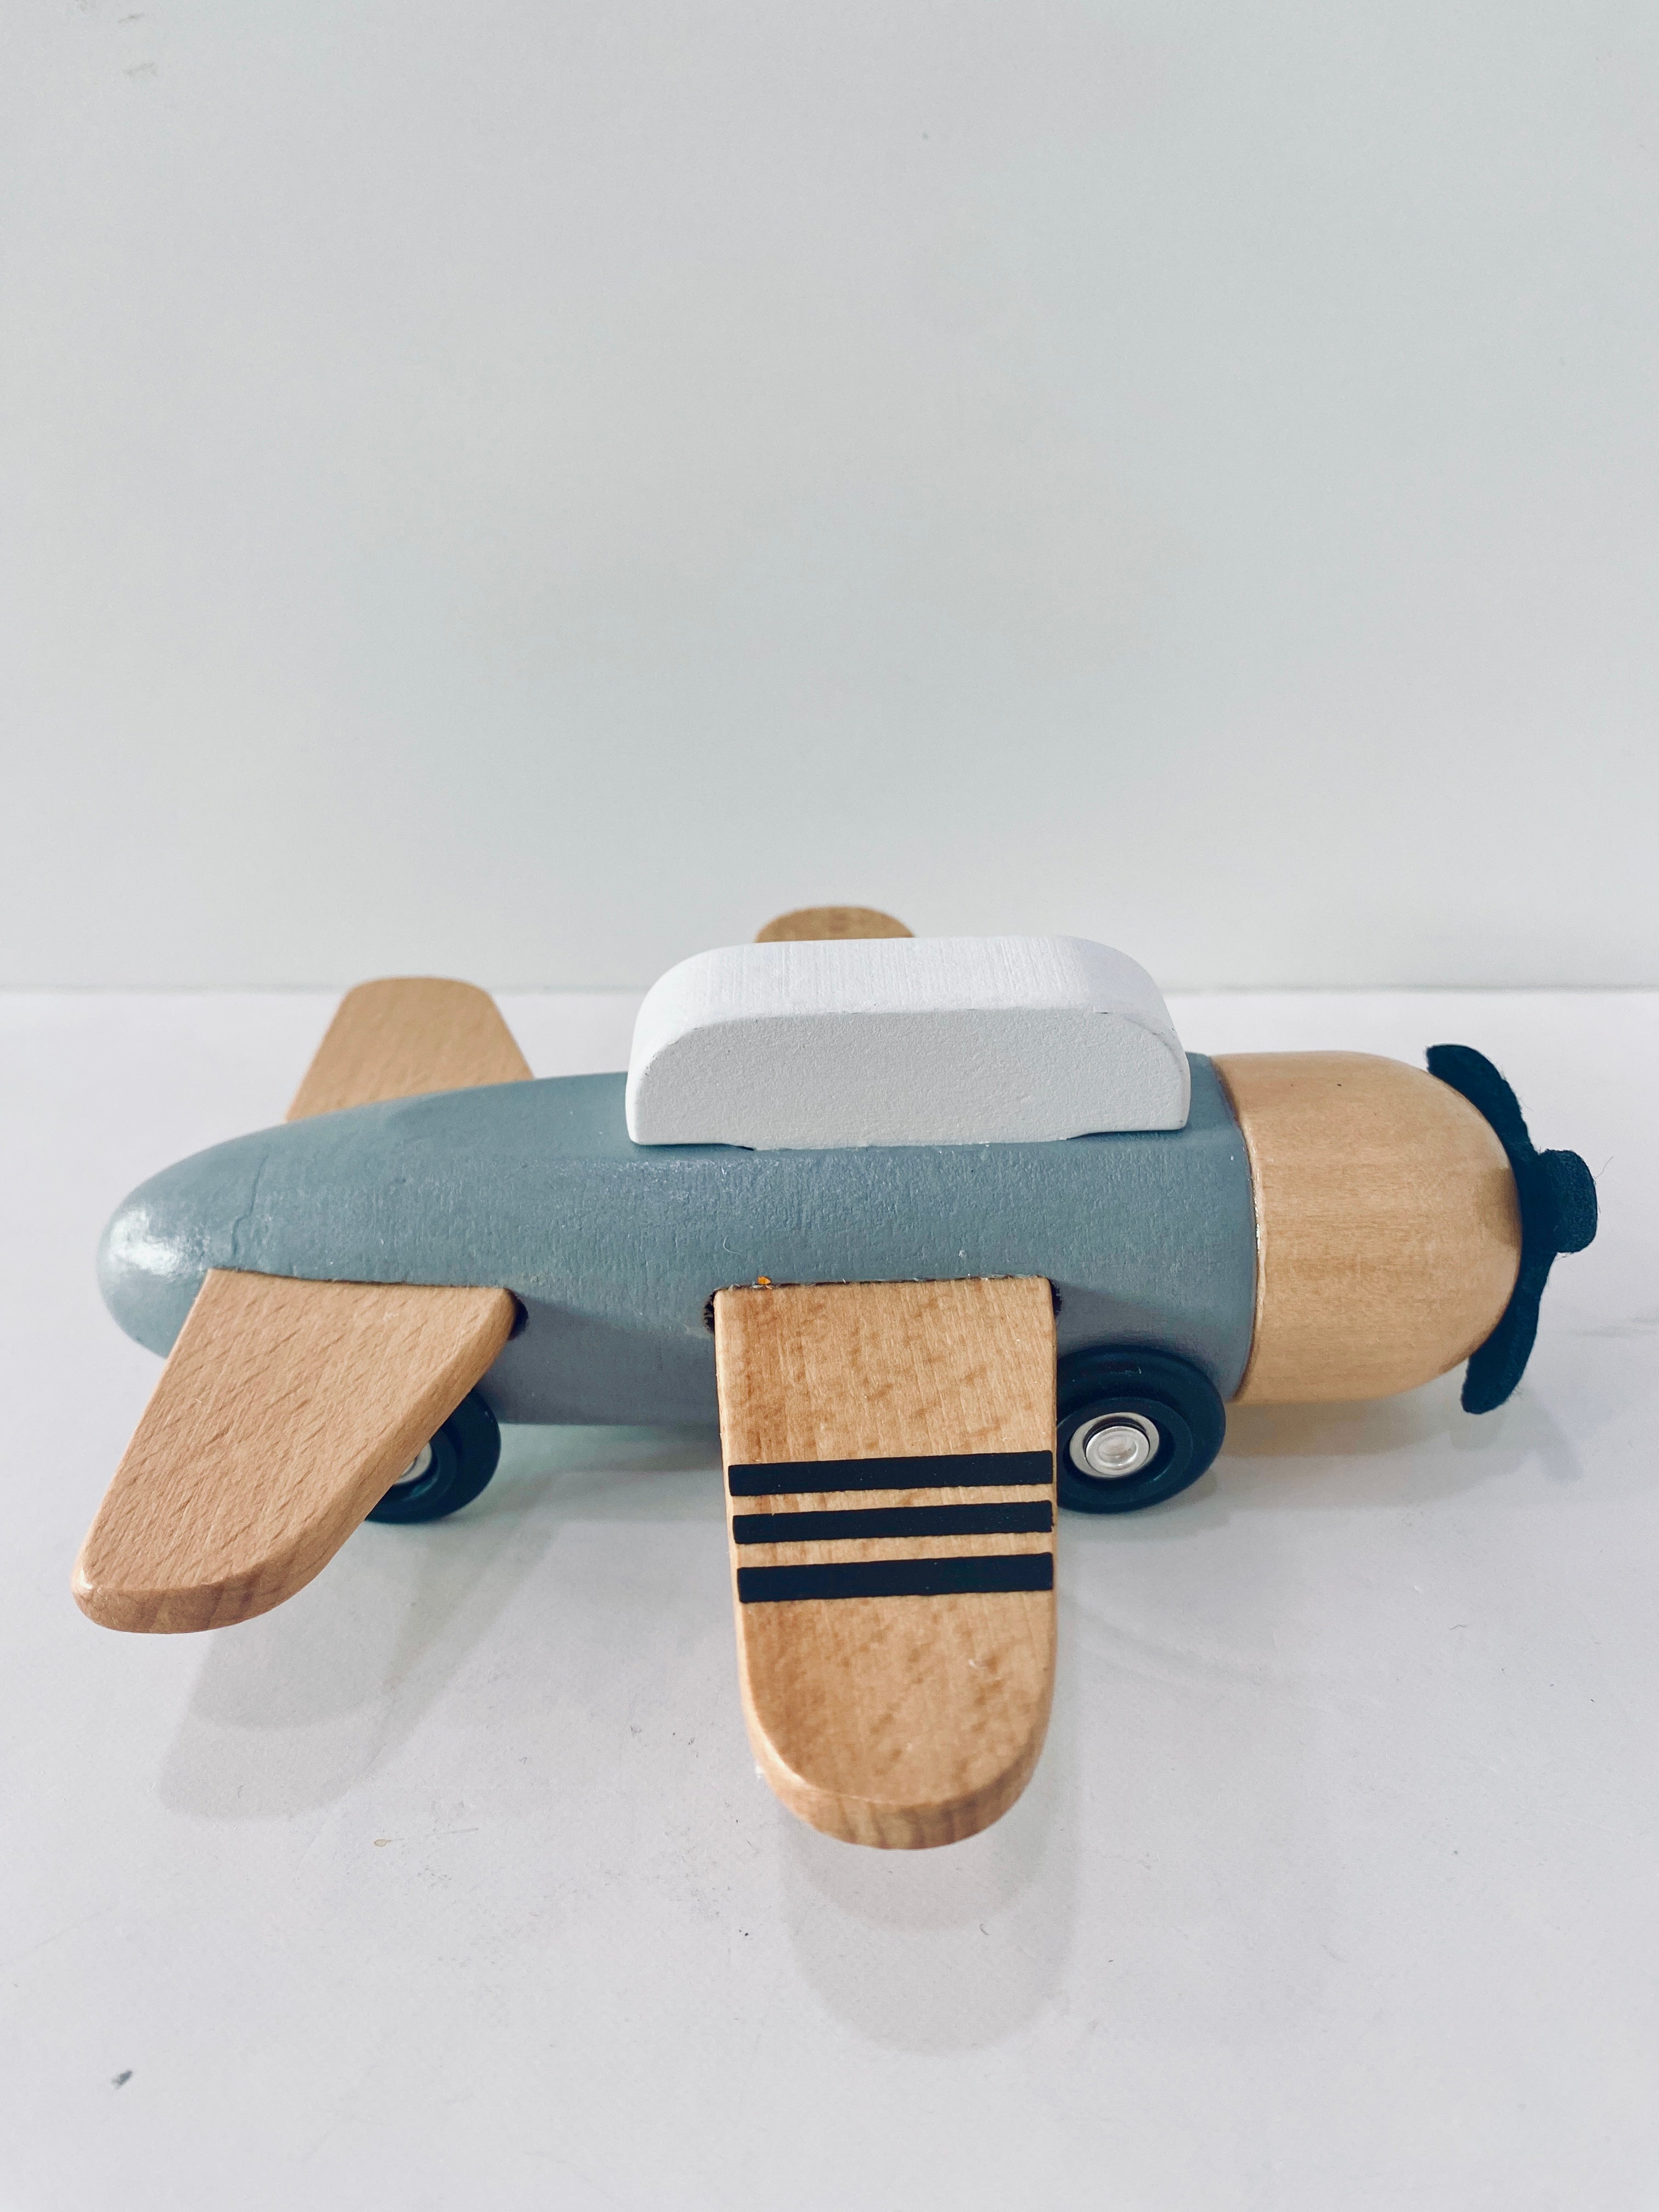 Woody Wooden Airplane